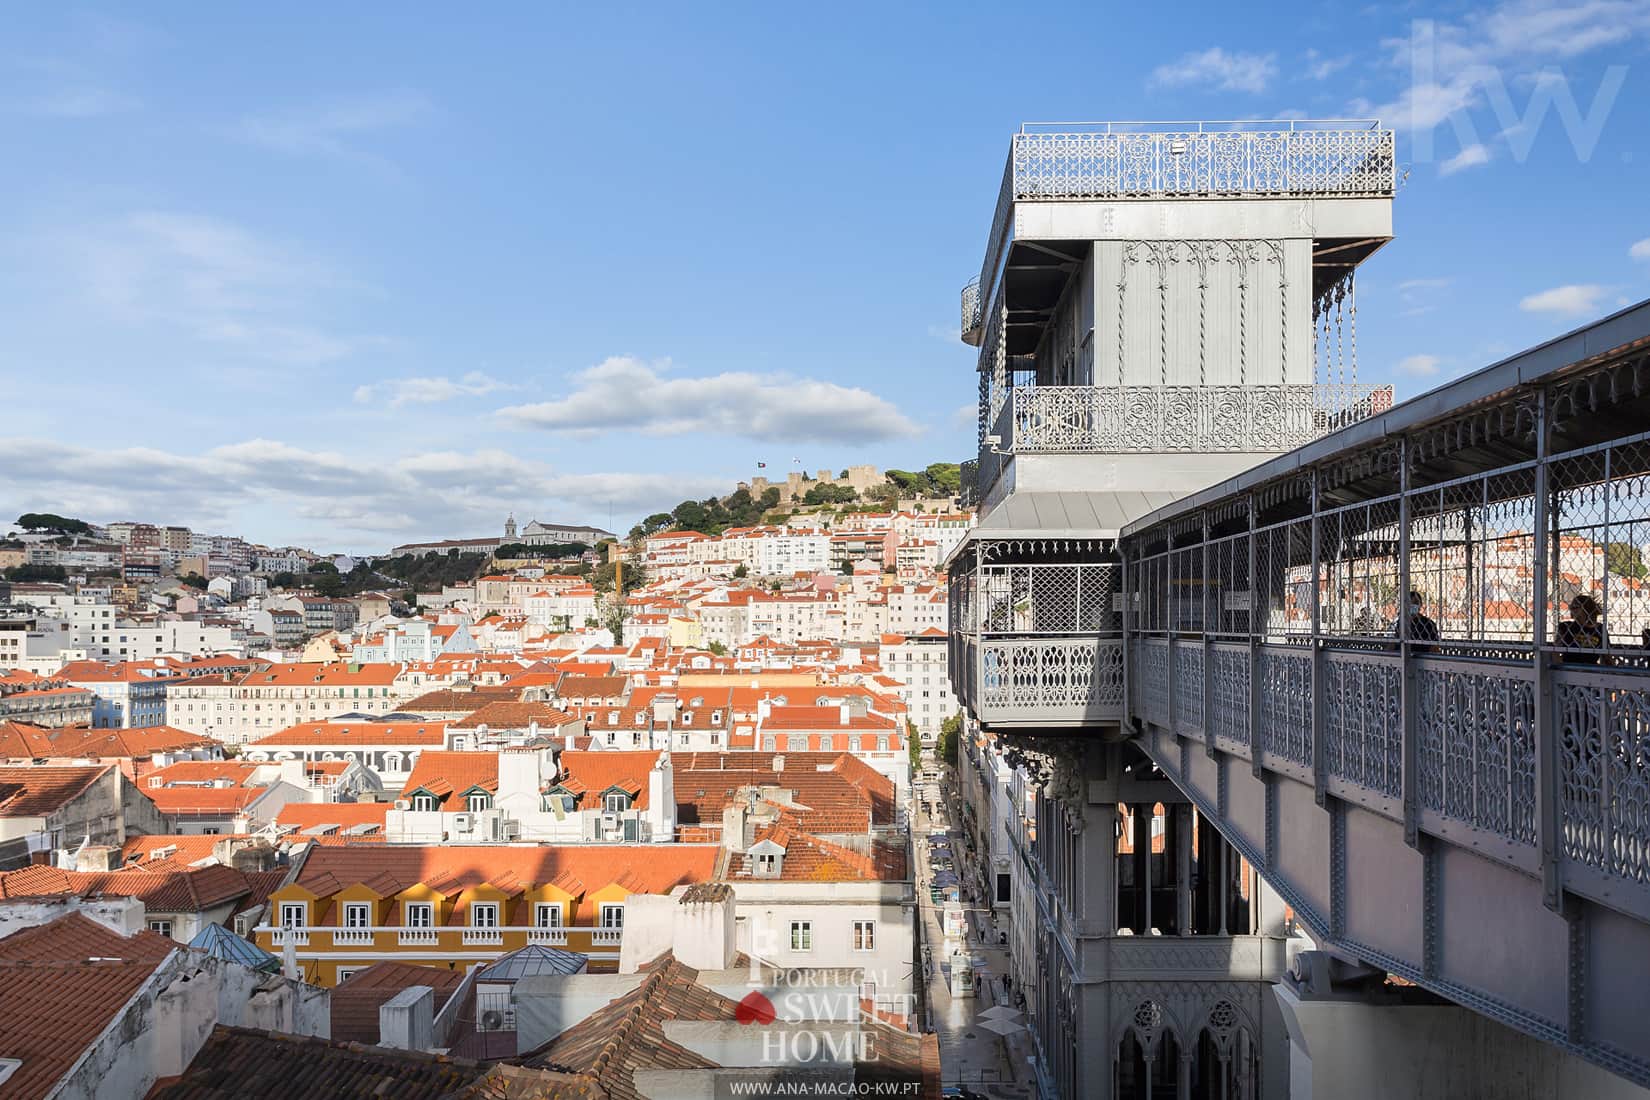 View over Lisbon from the Santa Justa viewpoint